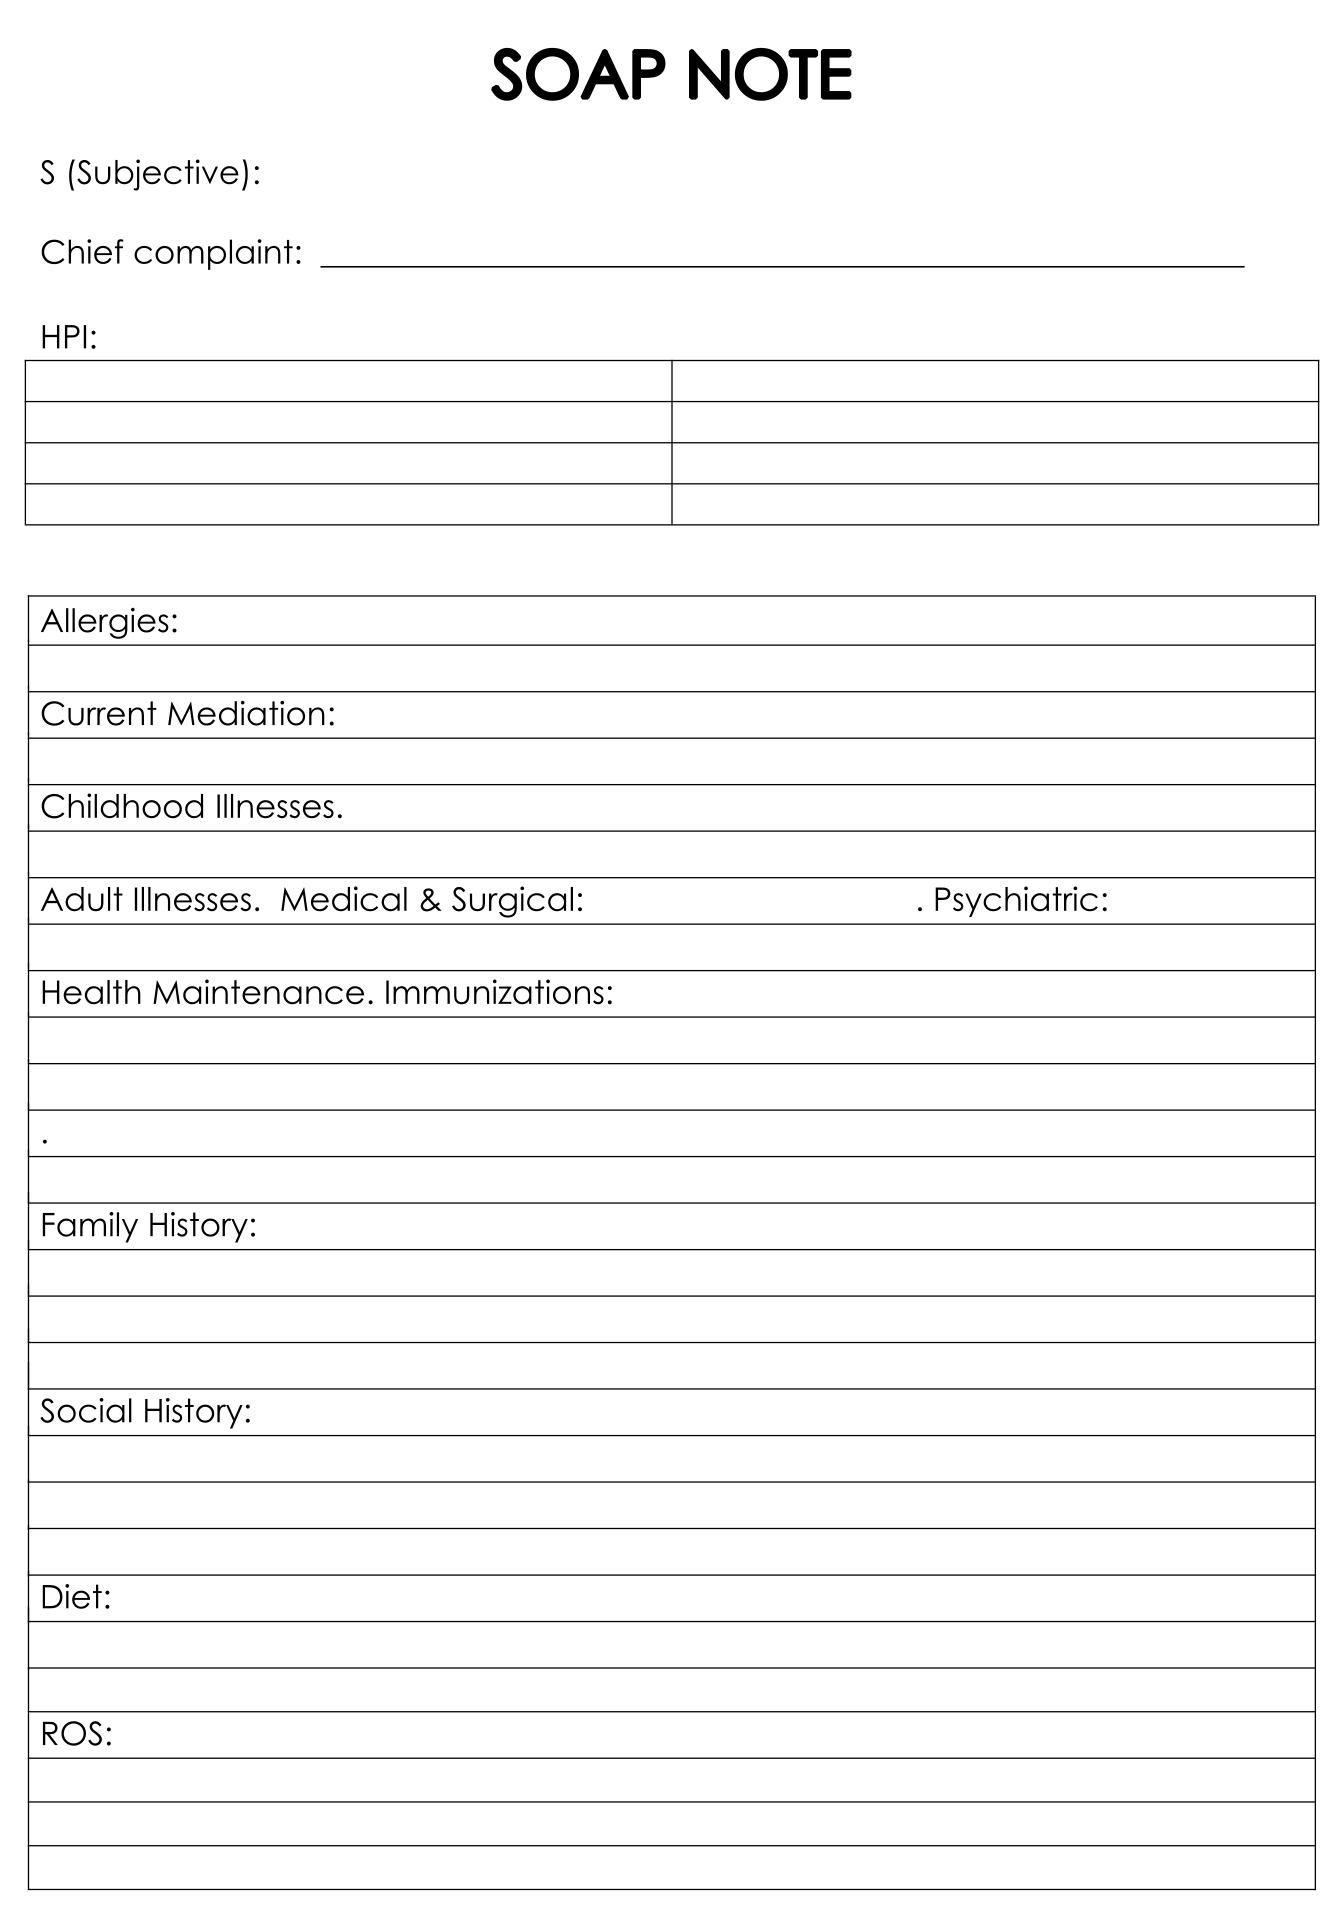 20 Best Printable Counseling Soap Note Templates - printablee.com For Soap Report Template